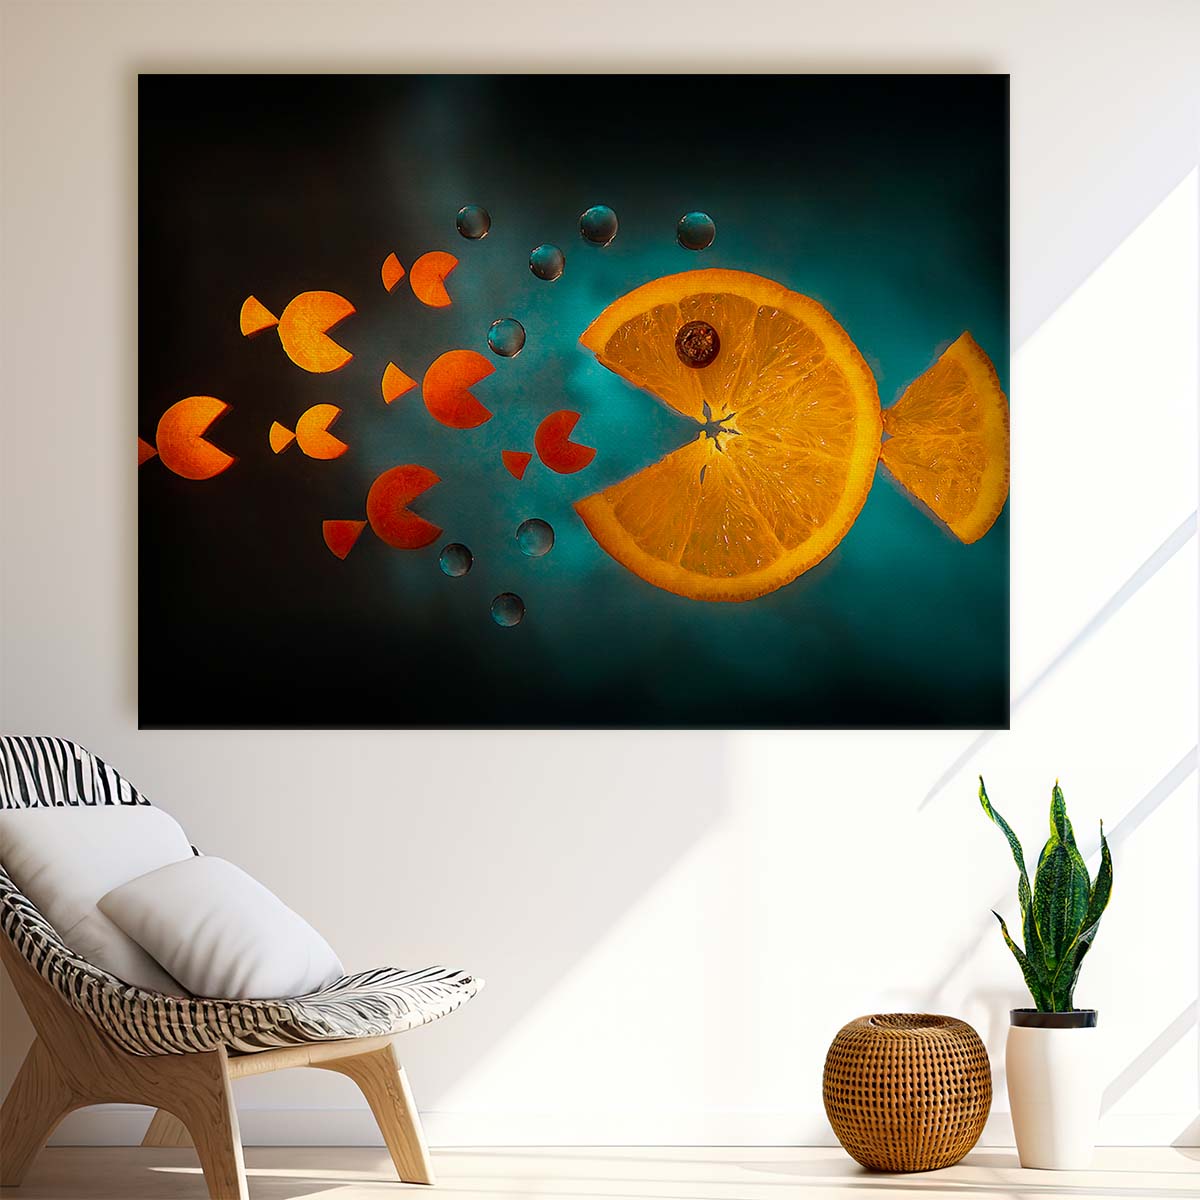 Whimsical Italian Orange Fish & Fruit Still Life Wall Art by Luxuriance Designs. Made in USA.